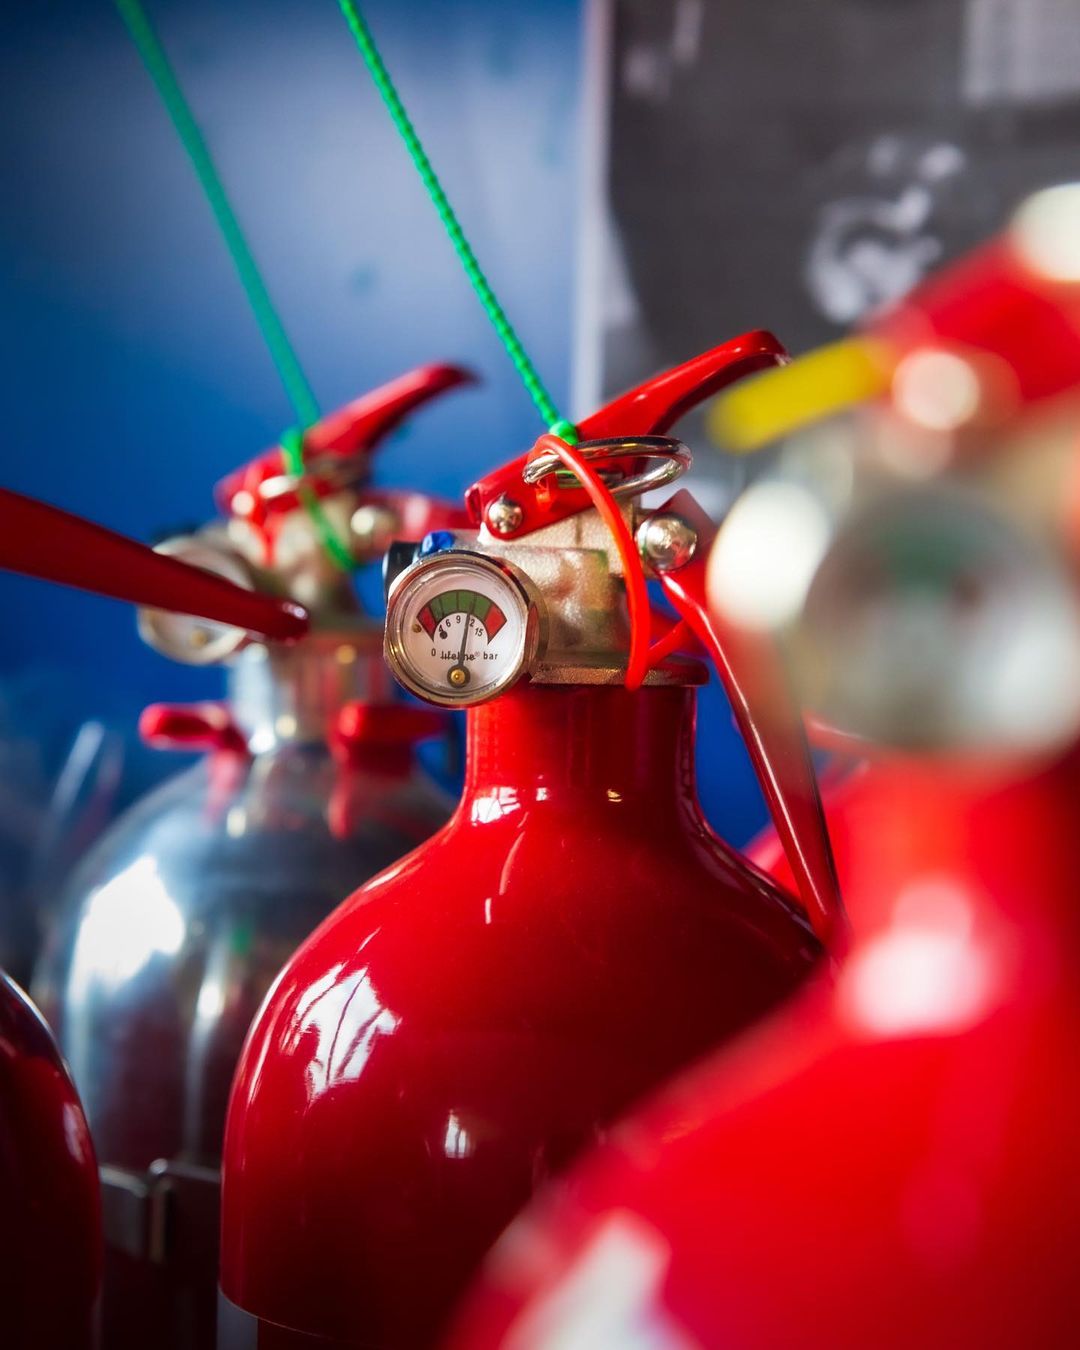 A QUICK INSIGHT INTO LIFELINE ZERO 2000 AND AFFF HAND HELD EXTINGUISHERS